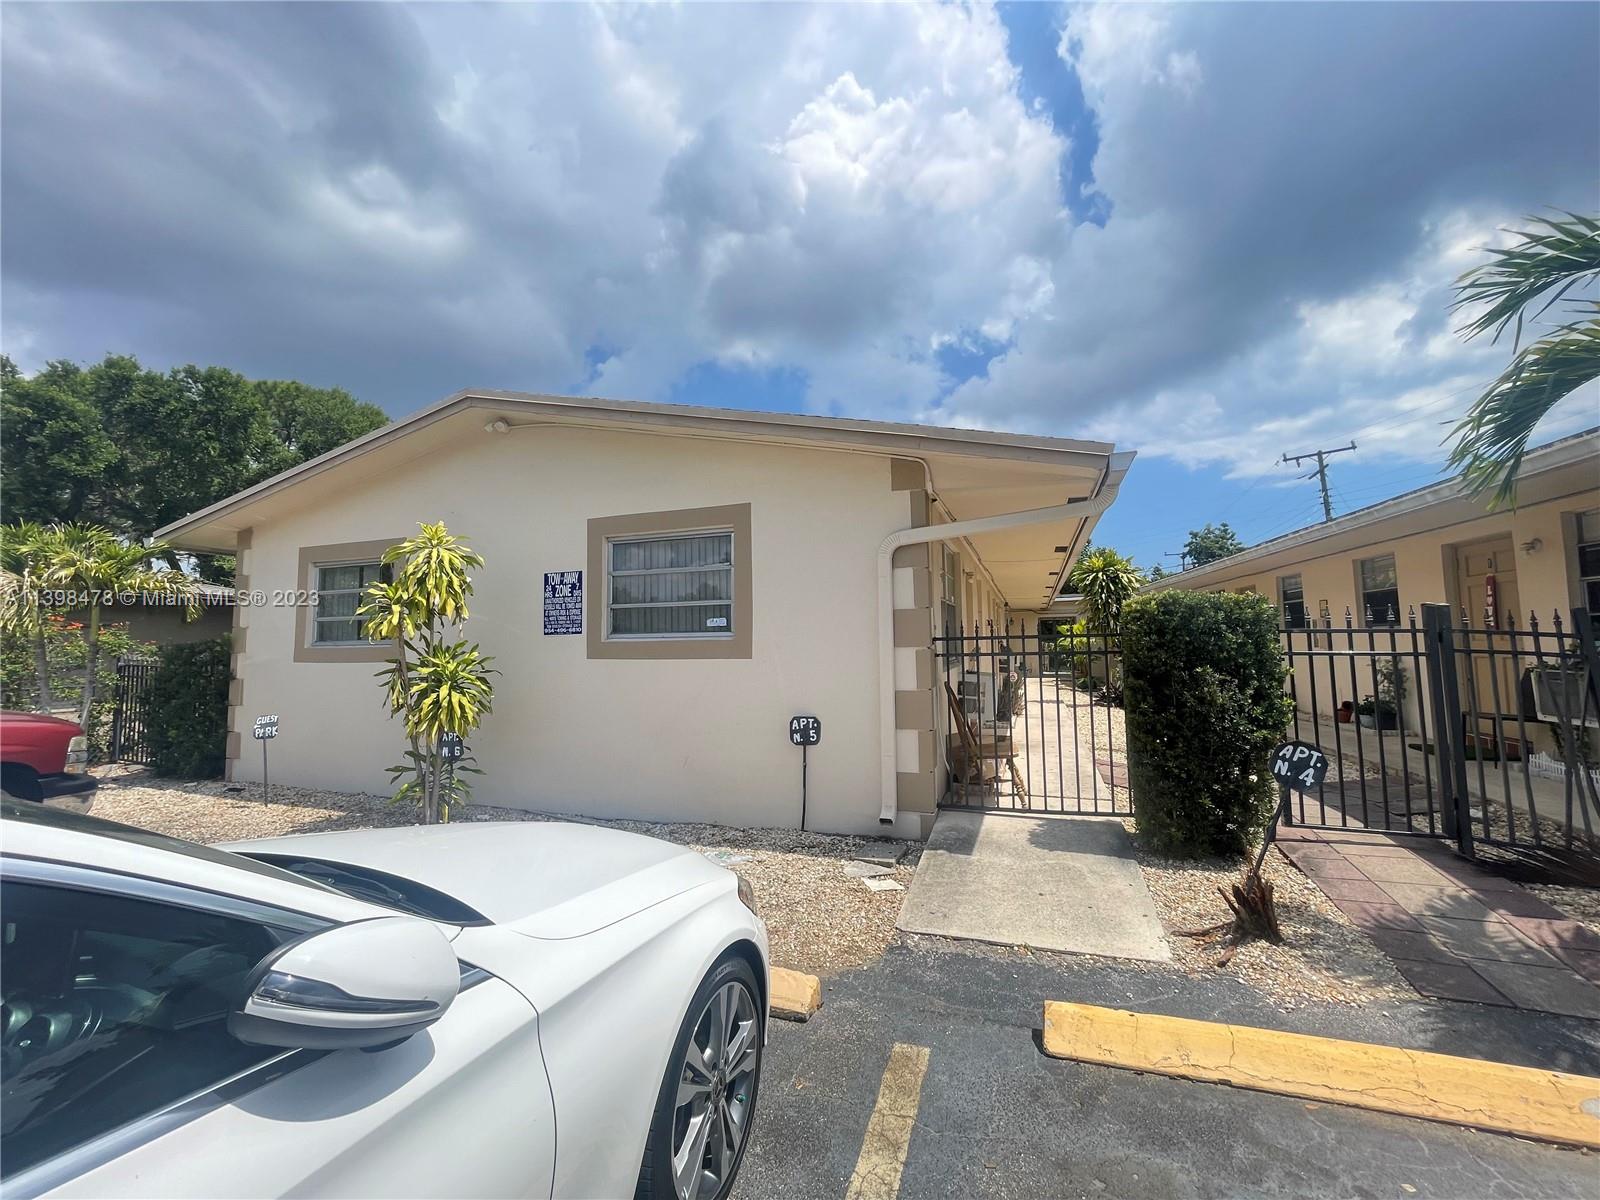 Rental Property at 1180 Sw 25th Ave  Sixplex Ave, Fort Lauderdale, Broward County, Florida -  - $1,200,000 MO.